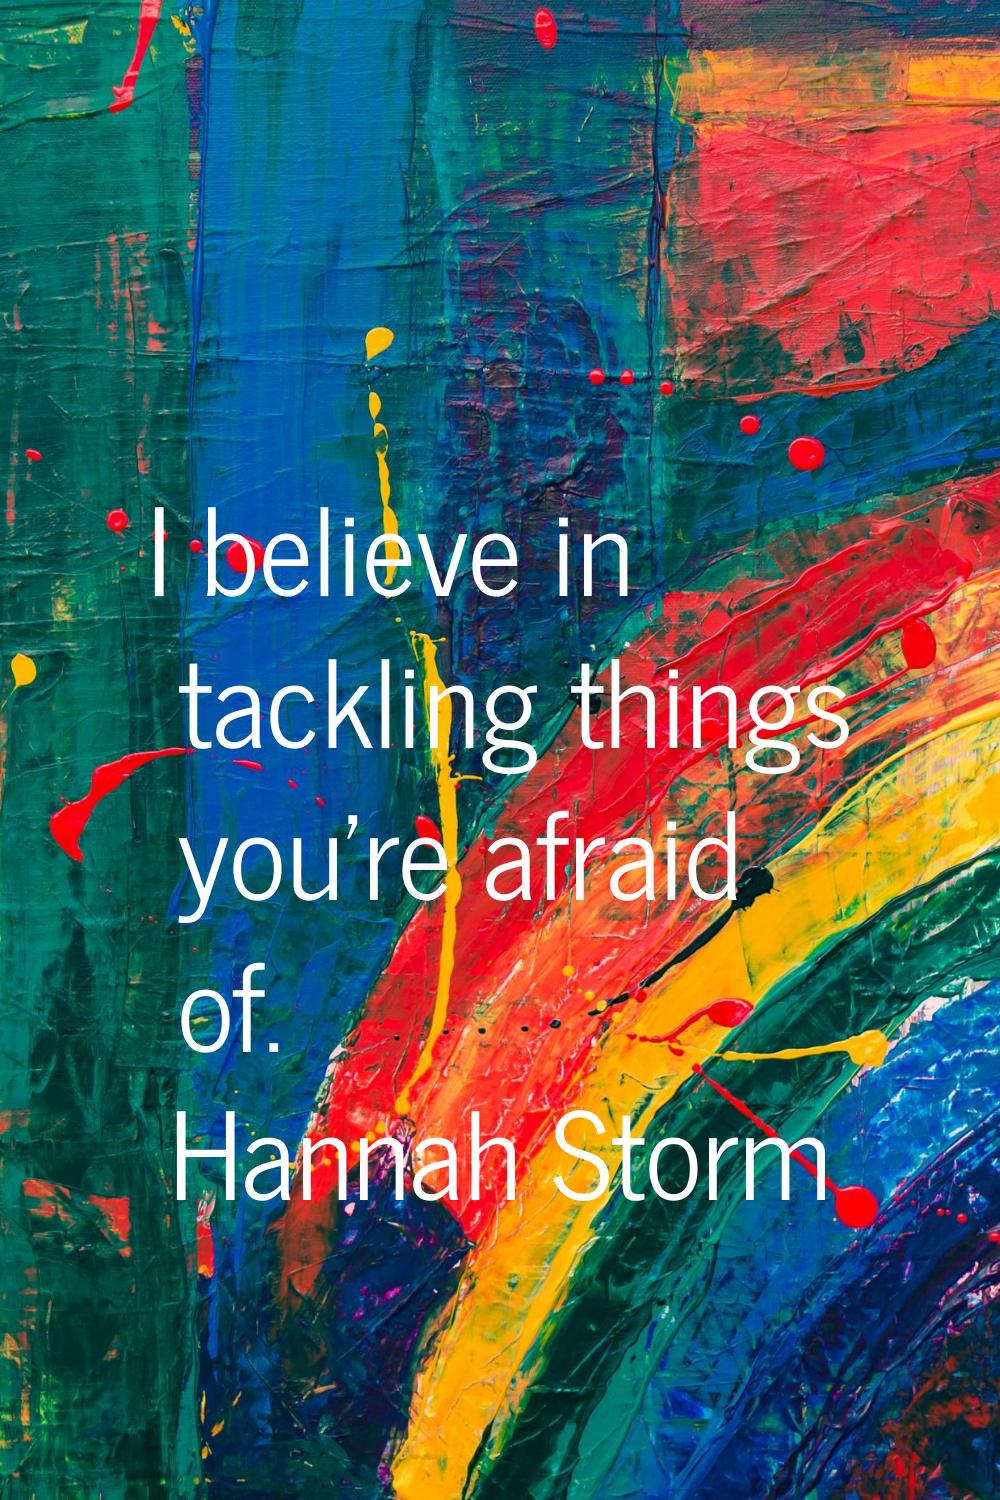 I believe in tackling things you're afraid of.